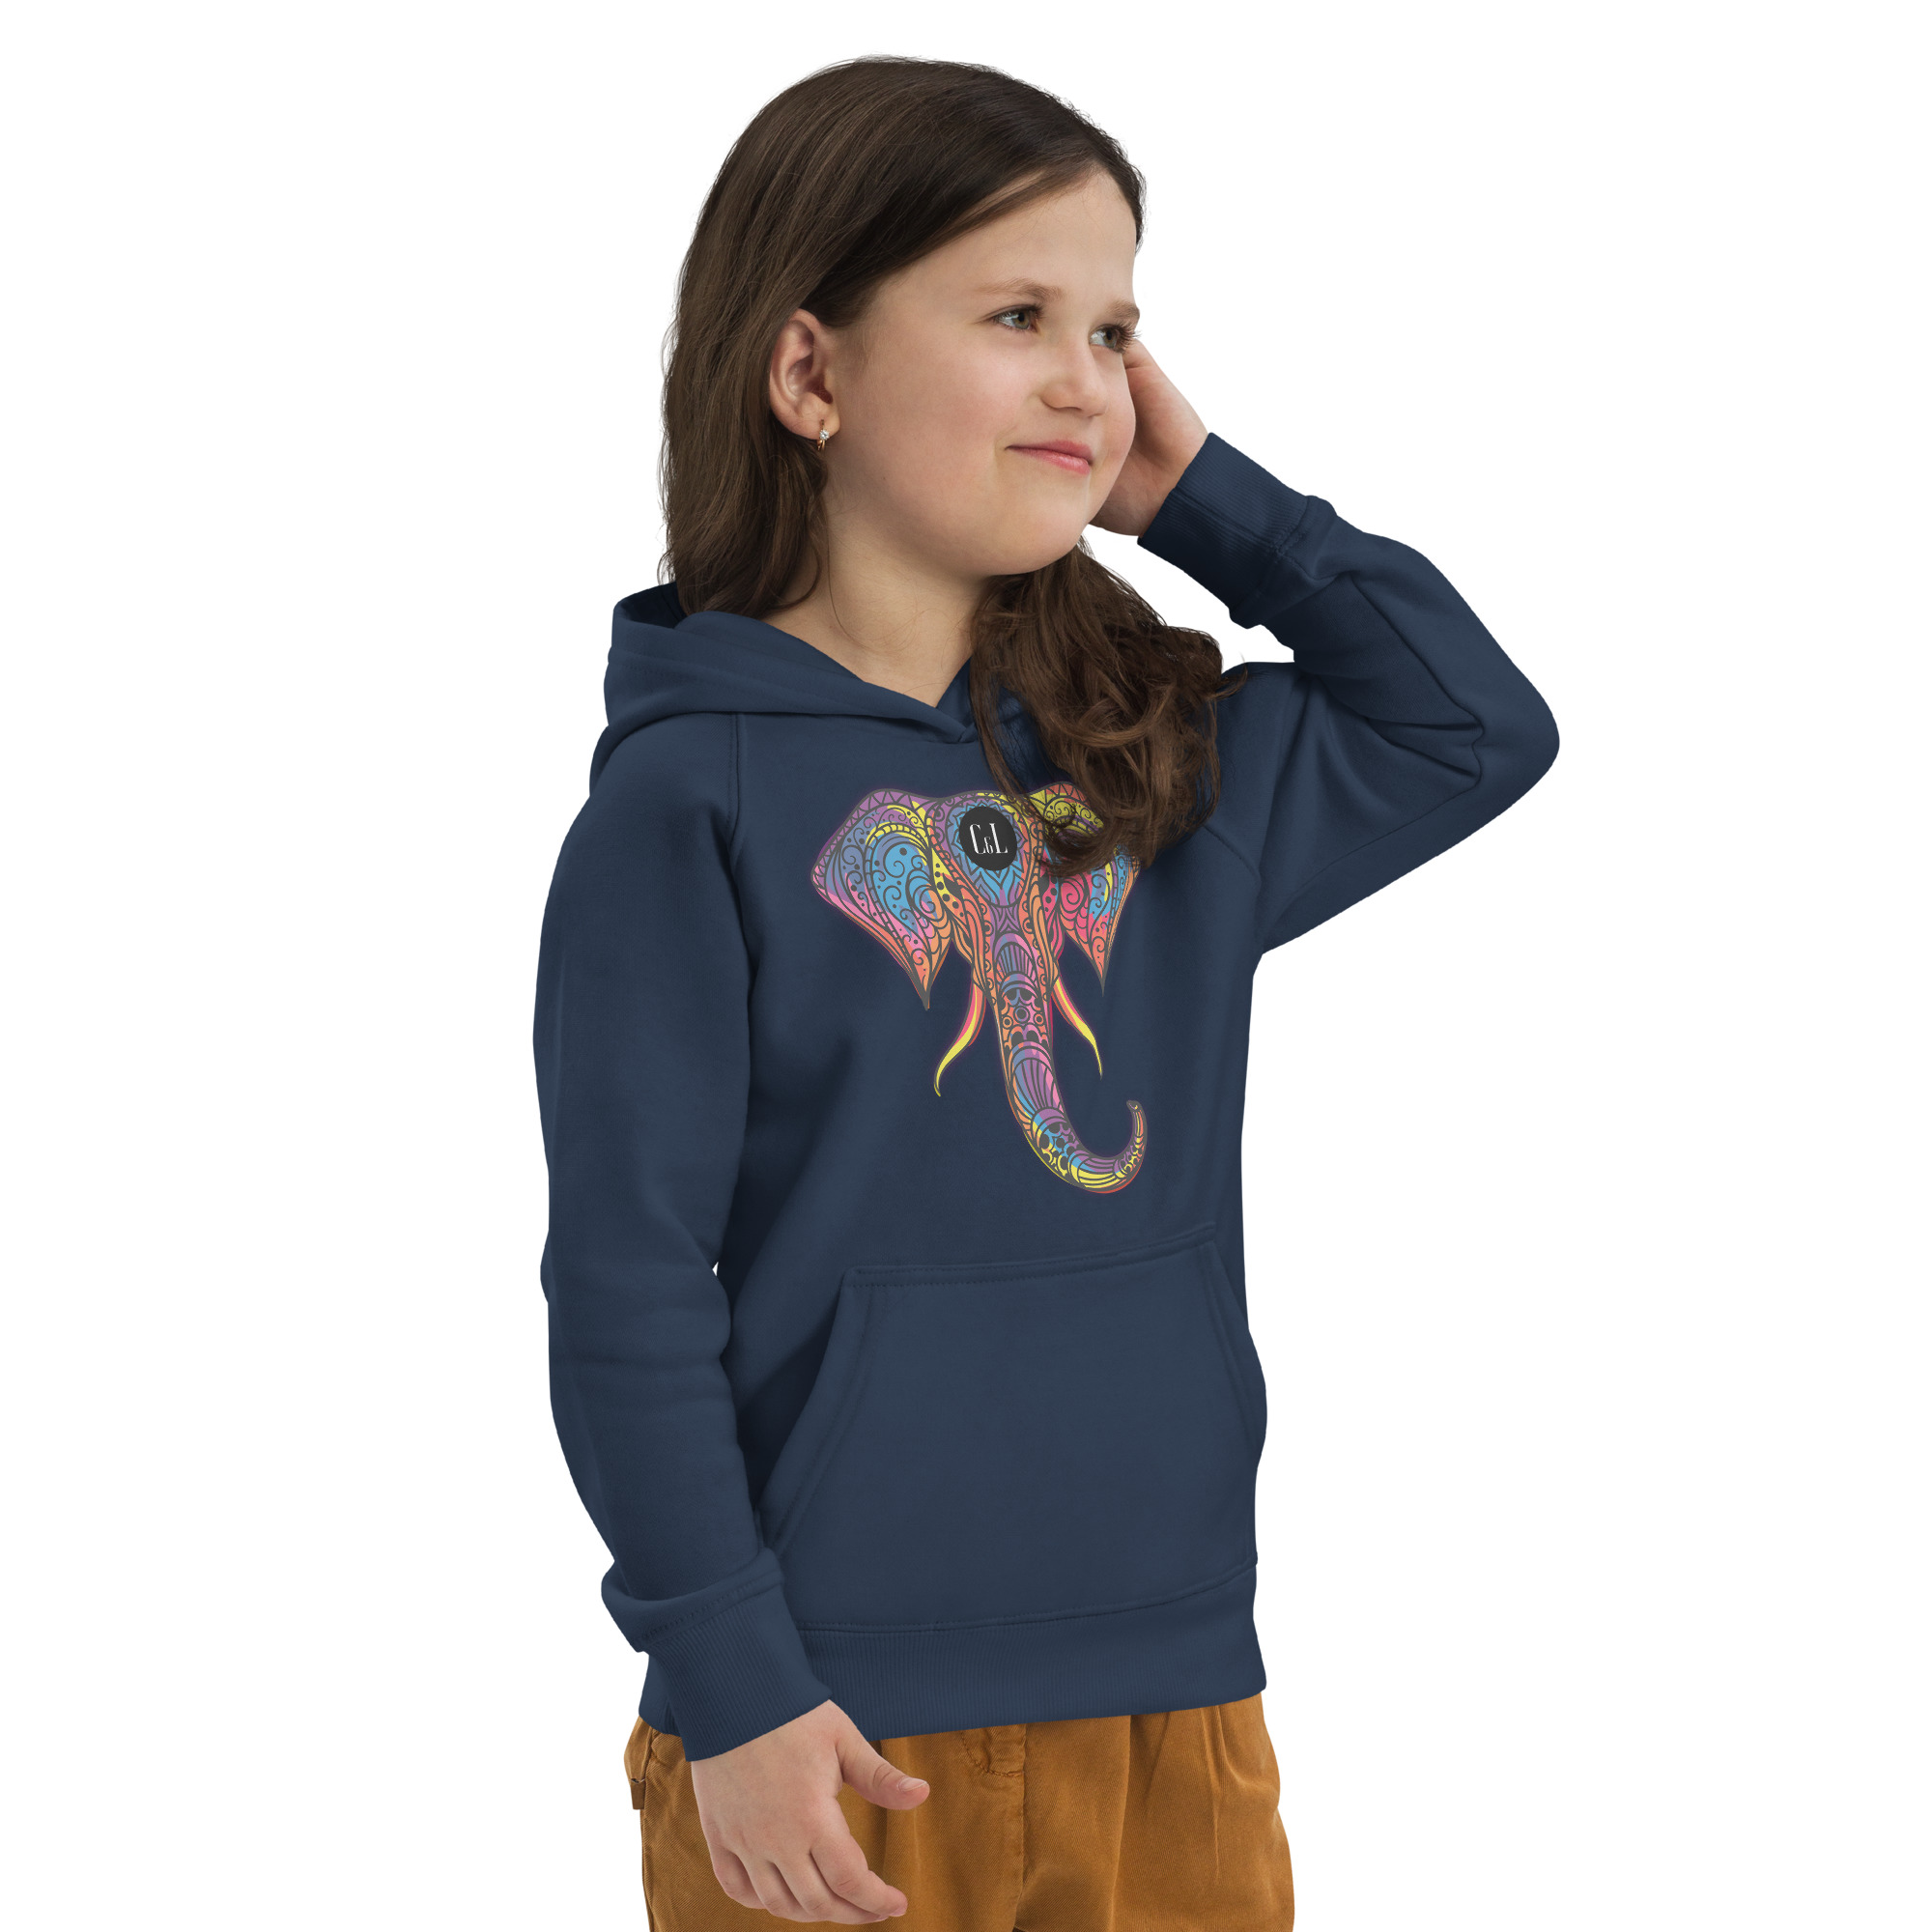 kids-eco-hoodie-french-navy-right-front-64804112b5d8e.jpg